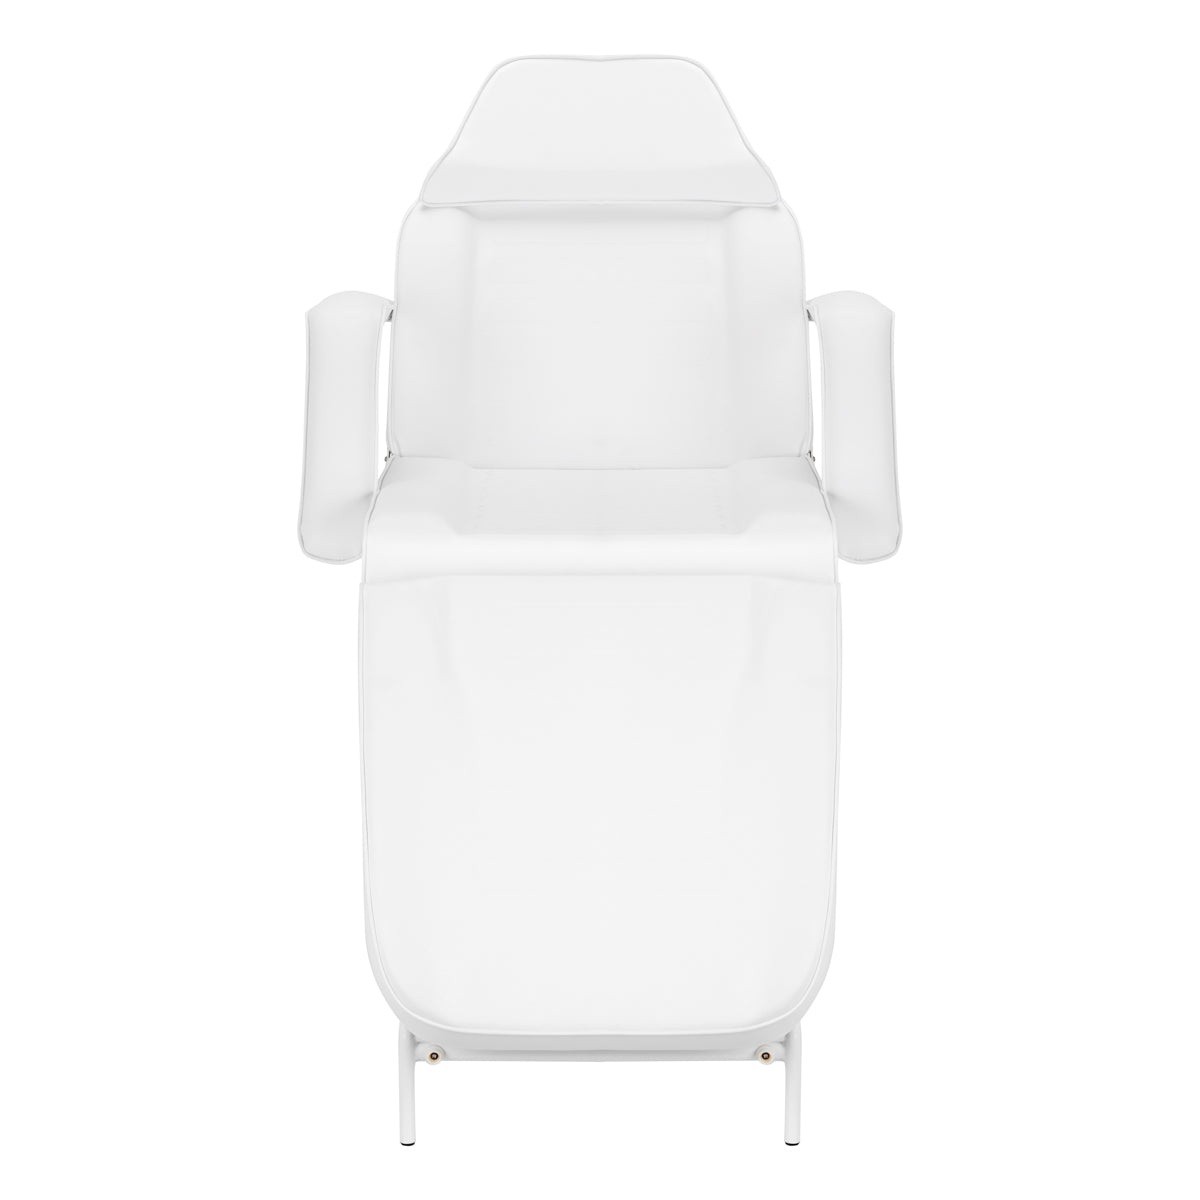 ActiveShop Cosmetic Chair 557A with Cuvette White